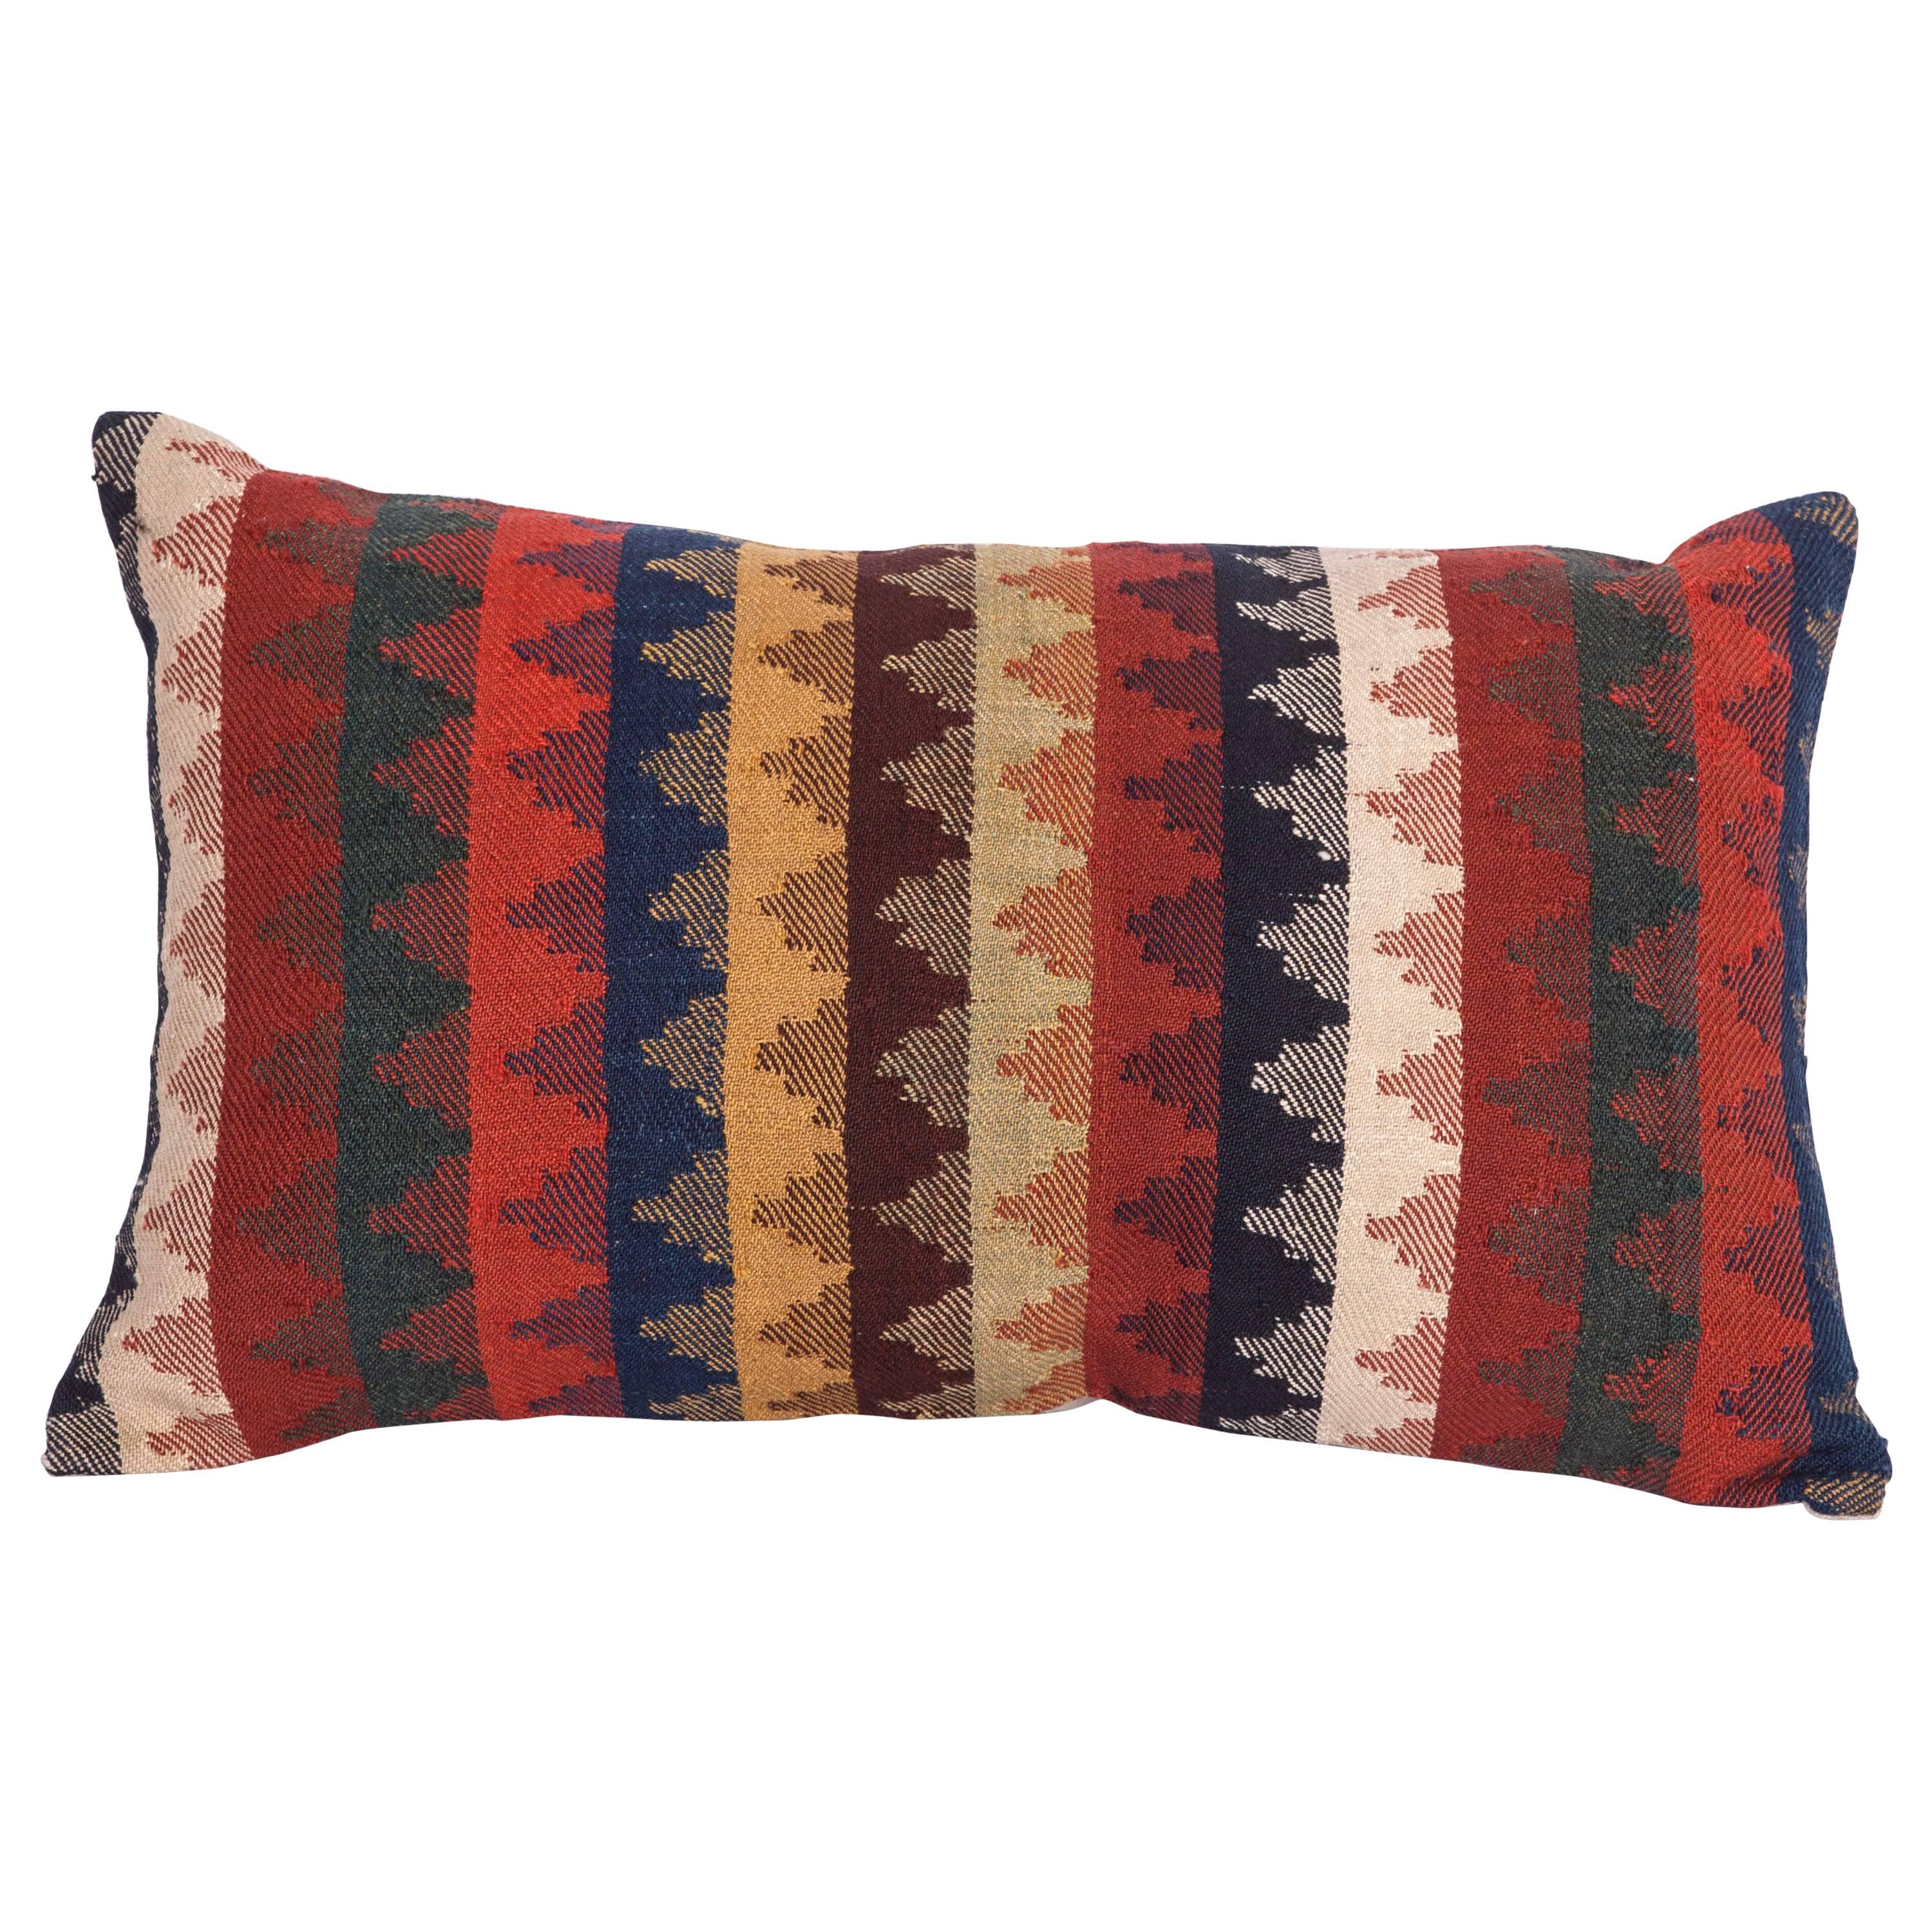 Pillow Made Out of a Late 19th Century South Persian Kilim Fragment